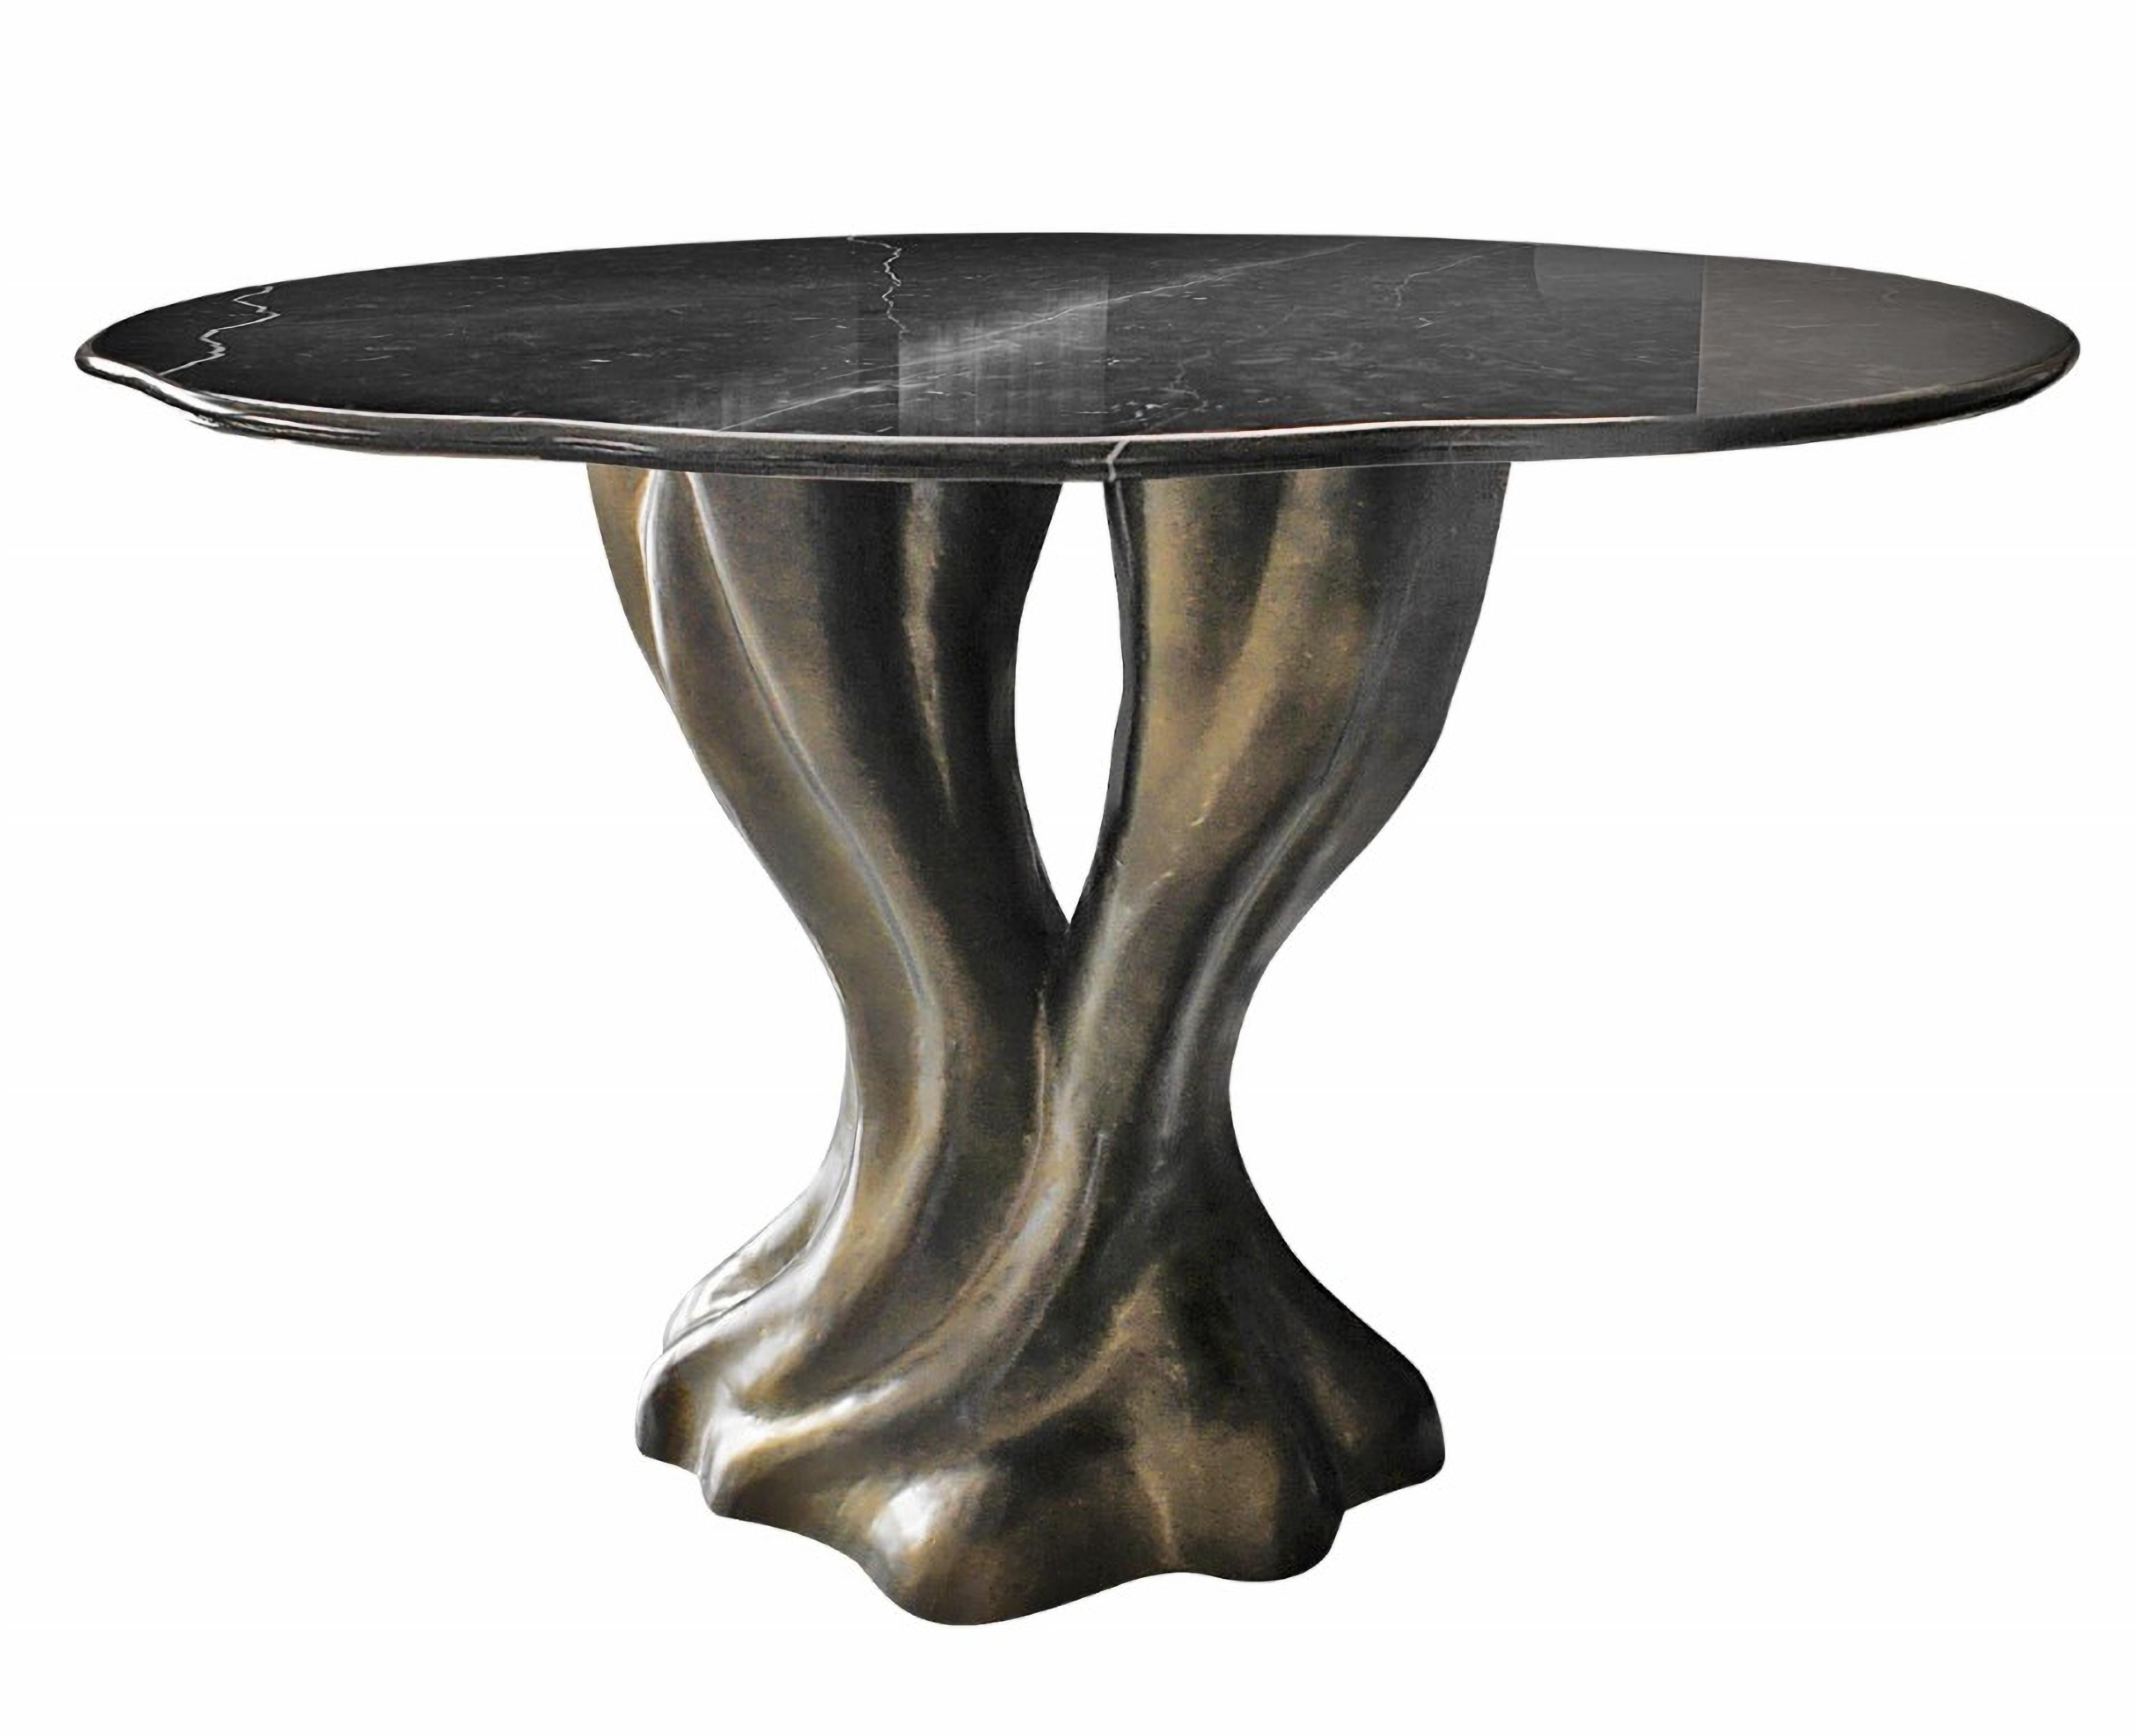 Dining table

General information

Dimensions (cm): Ø120 x 75
Dimensions (in): Ø47.2 x 29.5
seats: 4 a 6

Materials and colors

Top: black silk marble;
Base: resin reinforced with fiberglass finished in bronze color.



